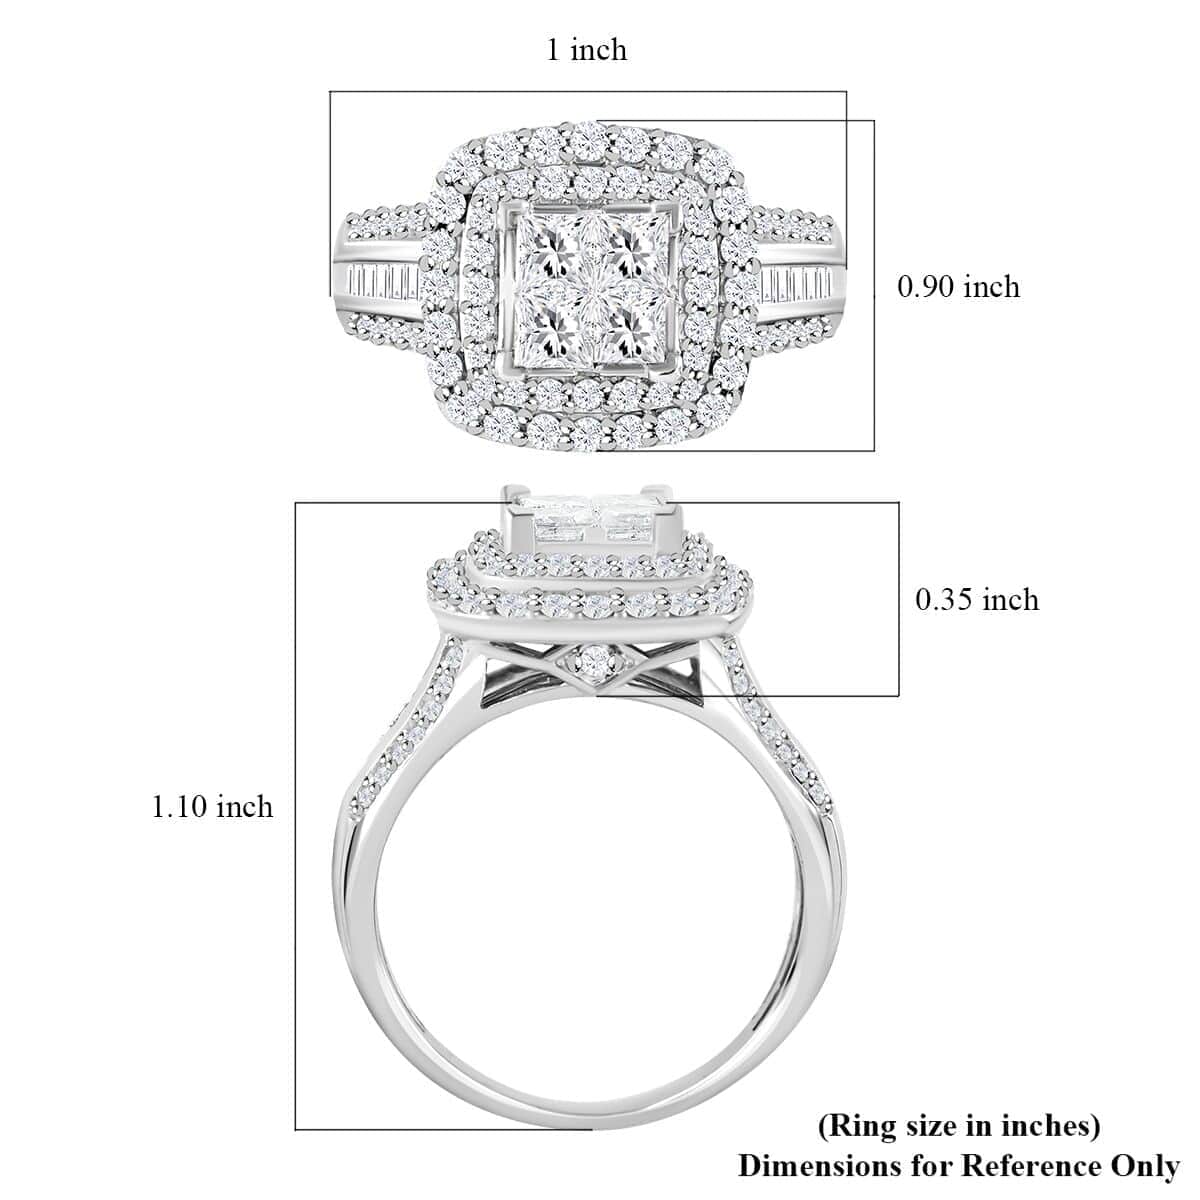 10K White Gold Diamond Ring 5.70 Grams 1.75 ctw (Delivery in 10-15 Business Days) image number 5